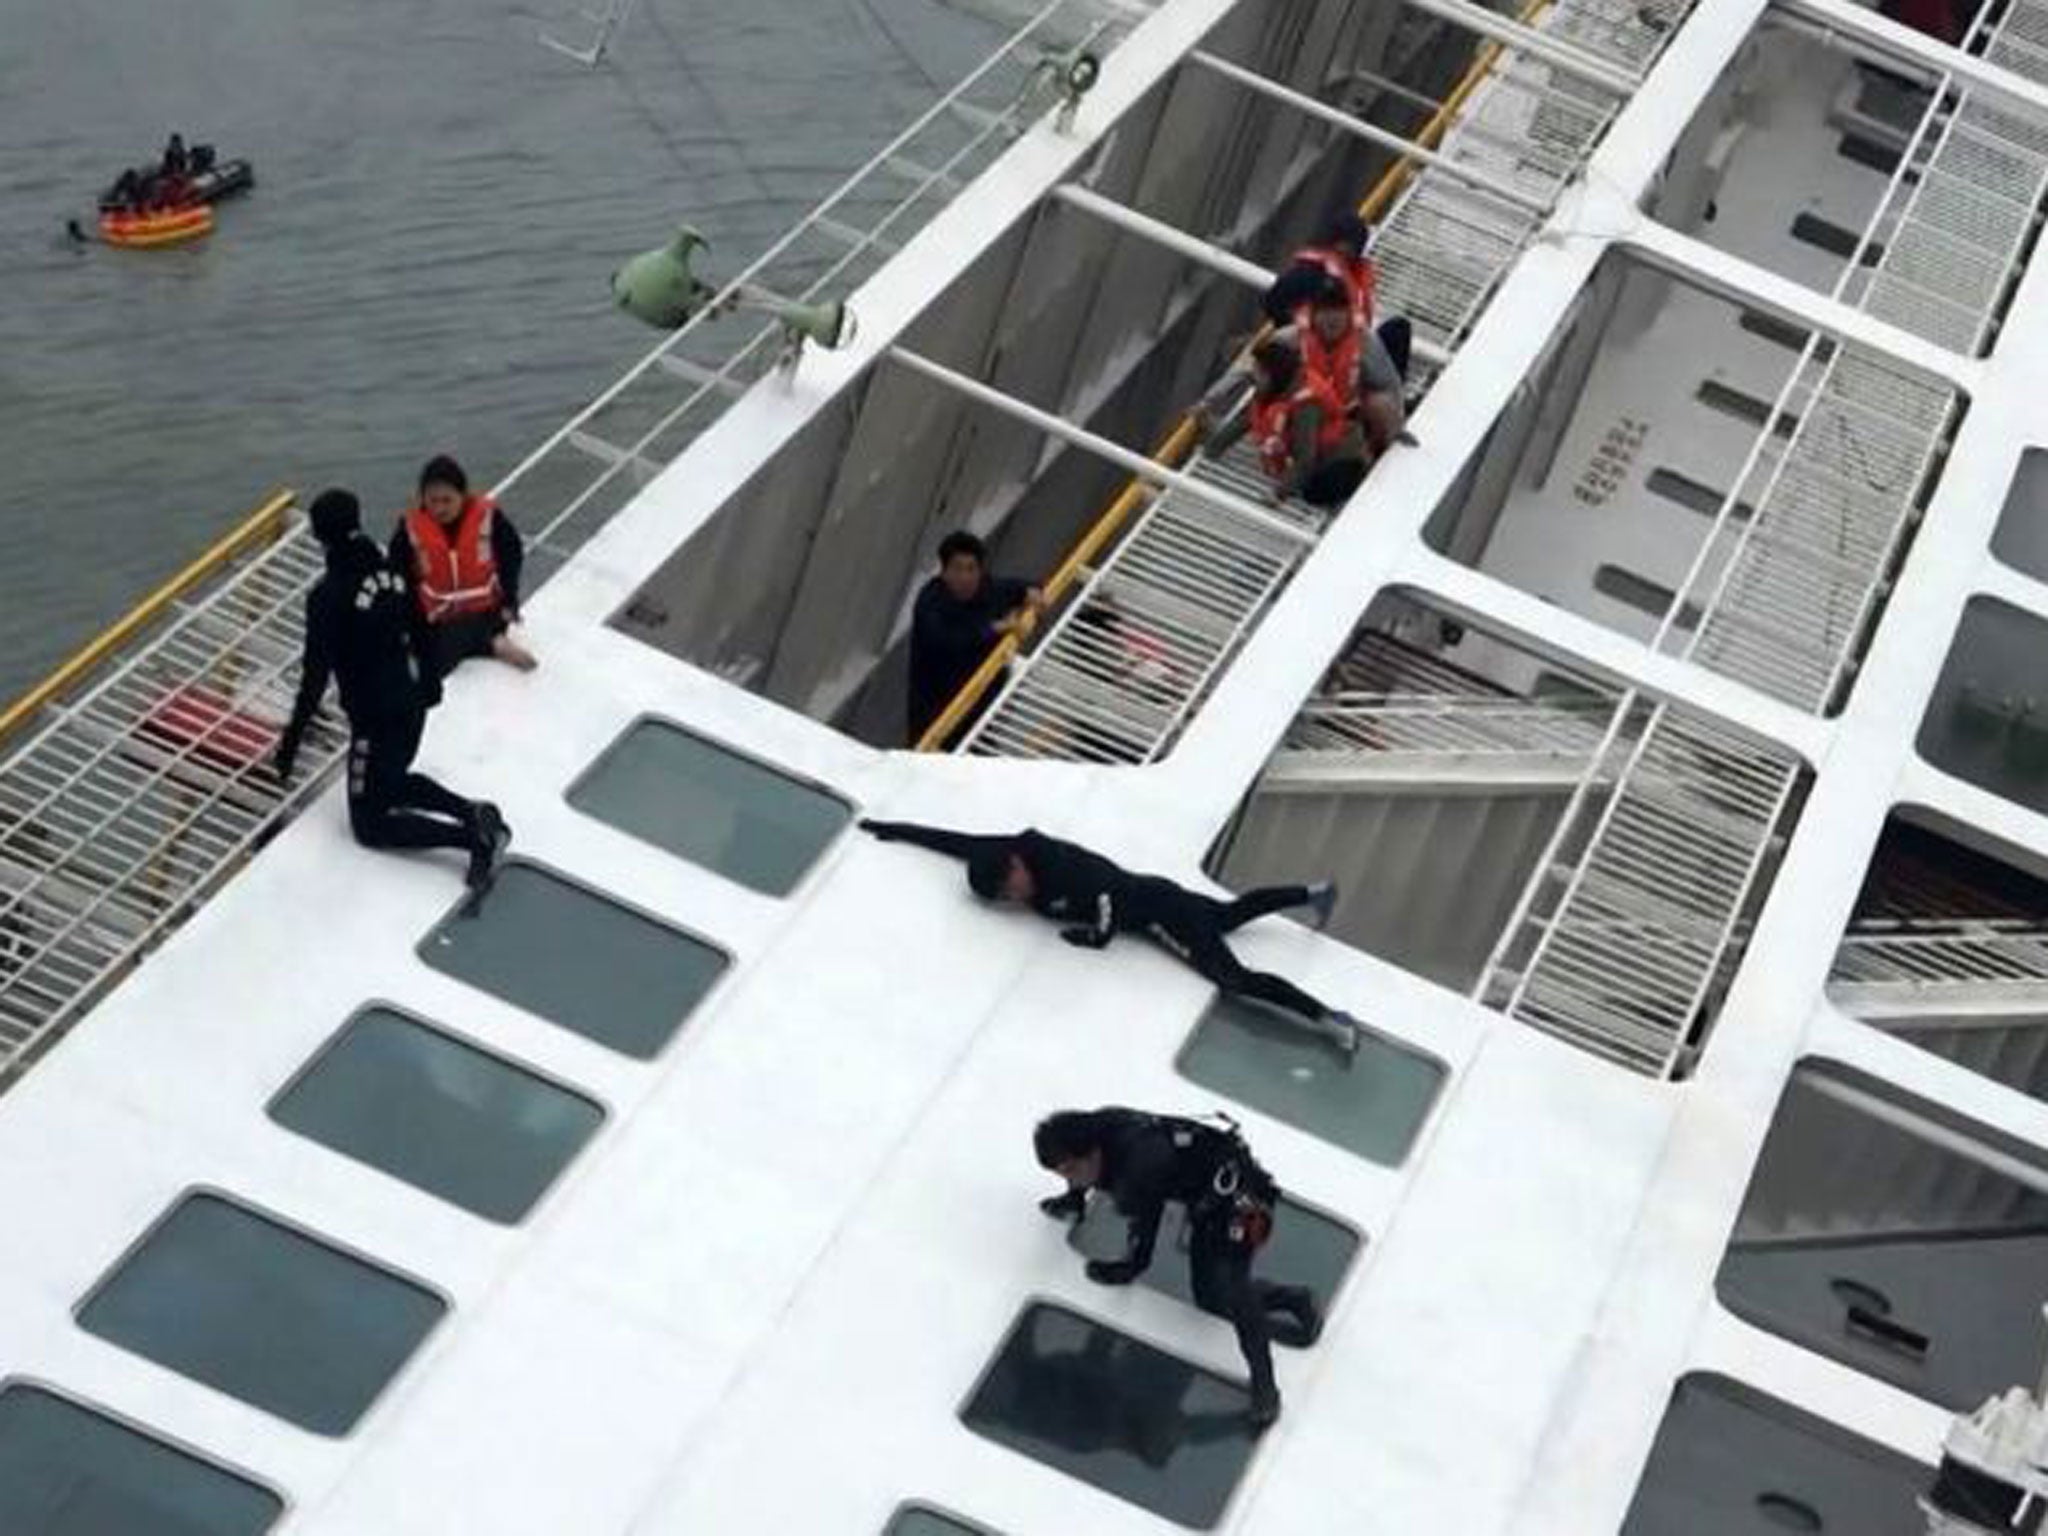 Maritime officers (in black) try to rescue passengers (in orange coloured life vests) onboard South Korean ferry "Sewol" which capsized off Jindo April 16